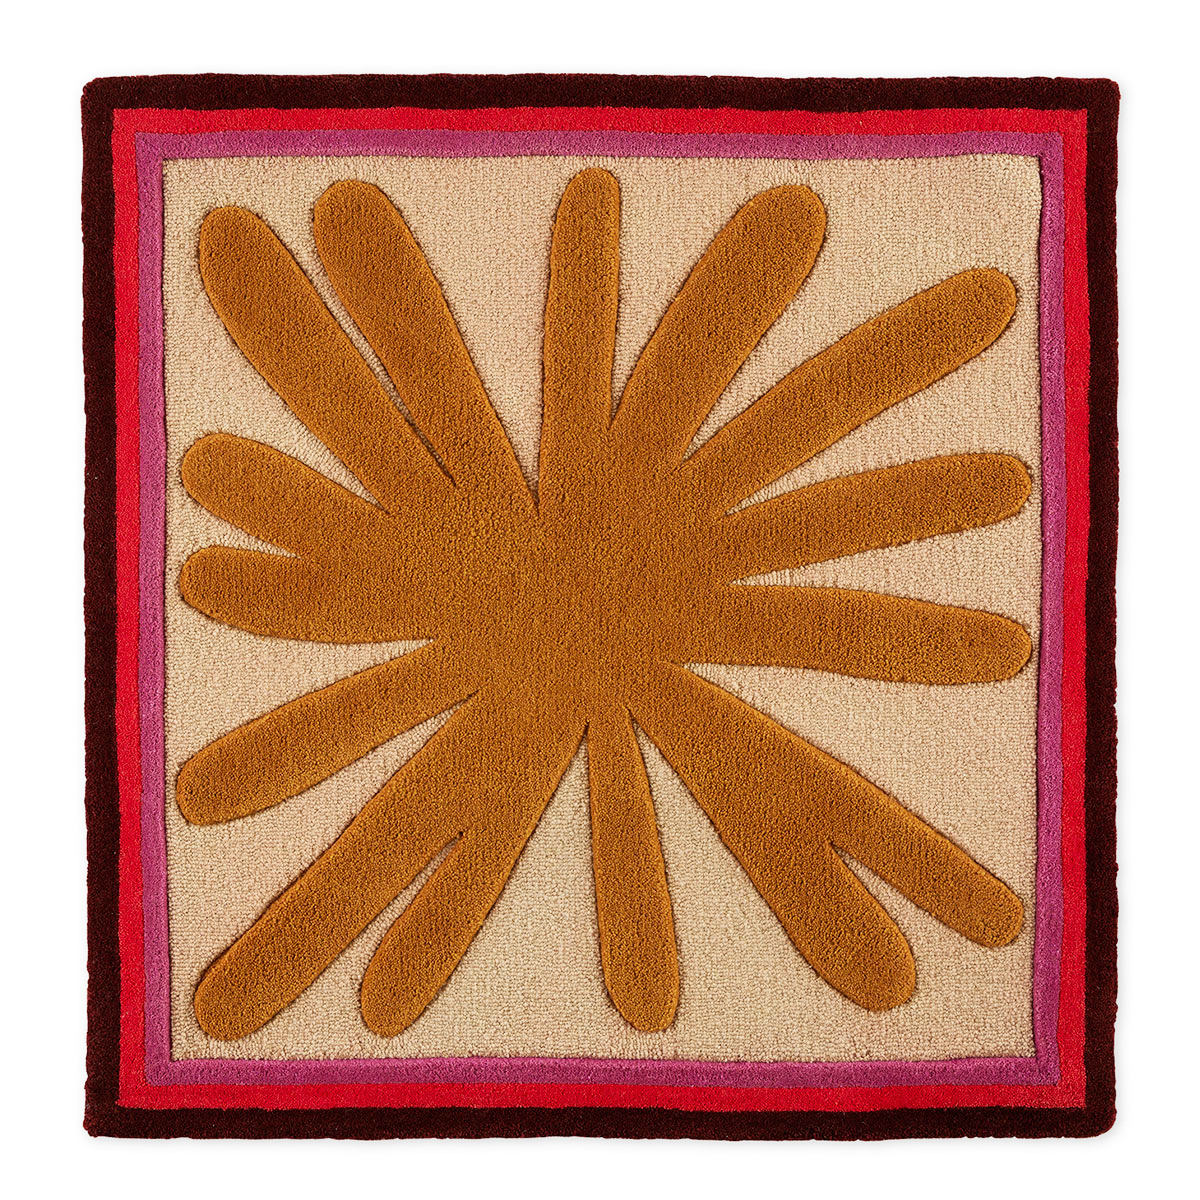 An abstract multi-colored rug named Urchin Uni.